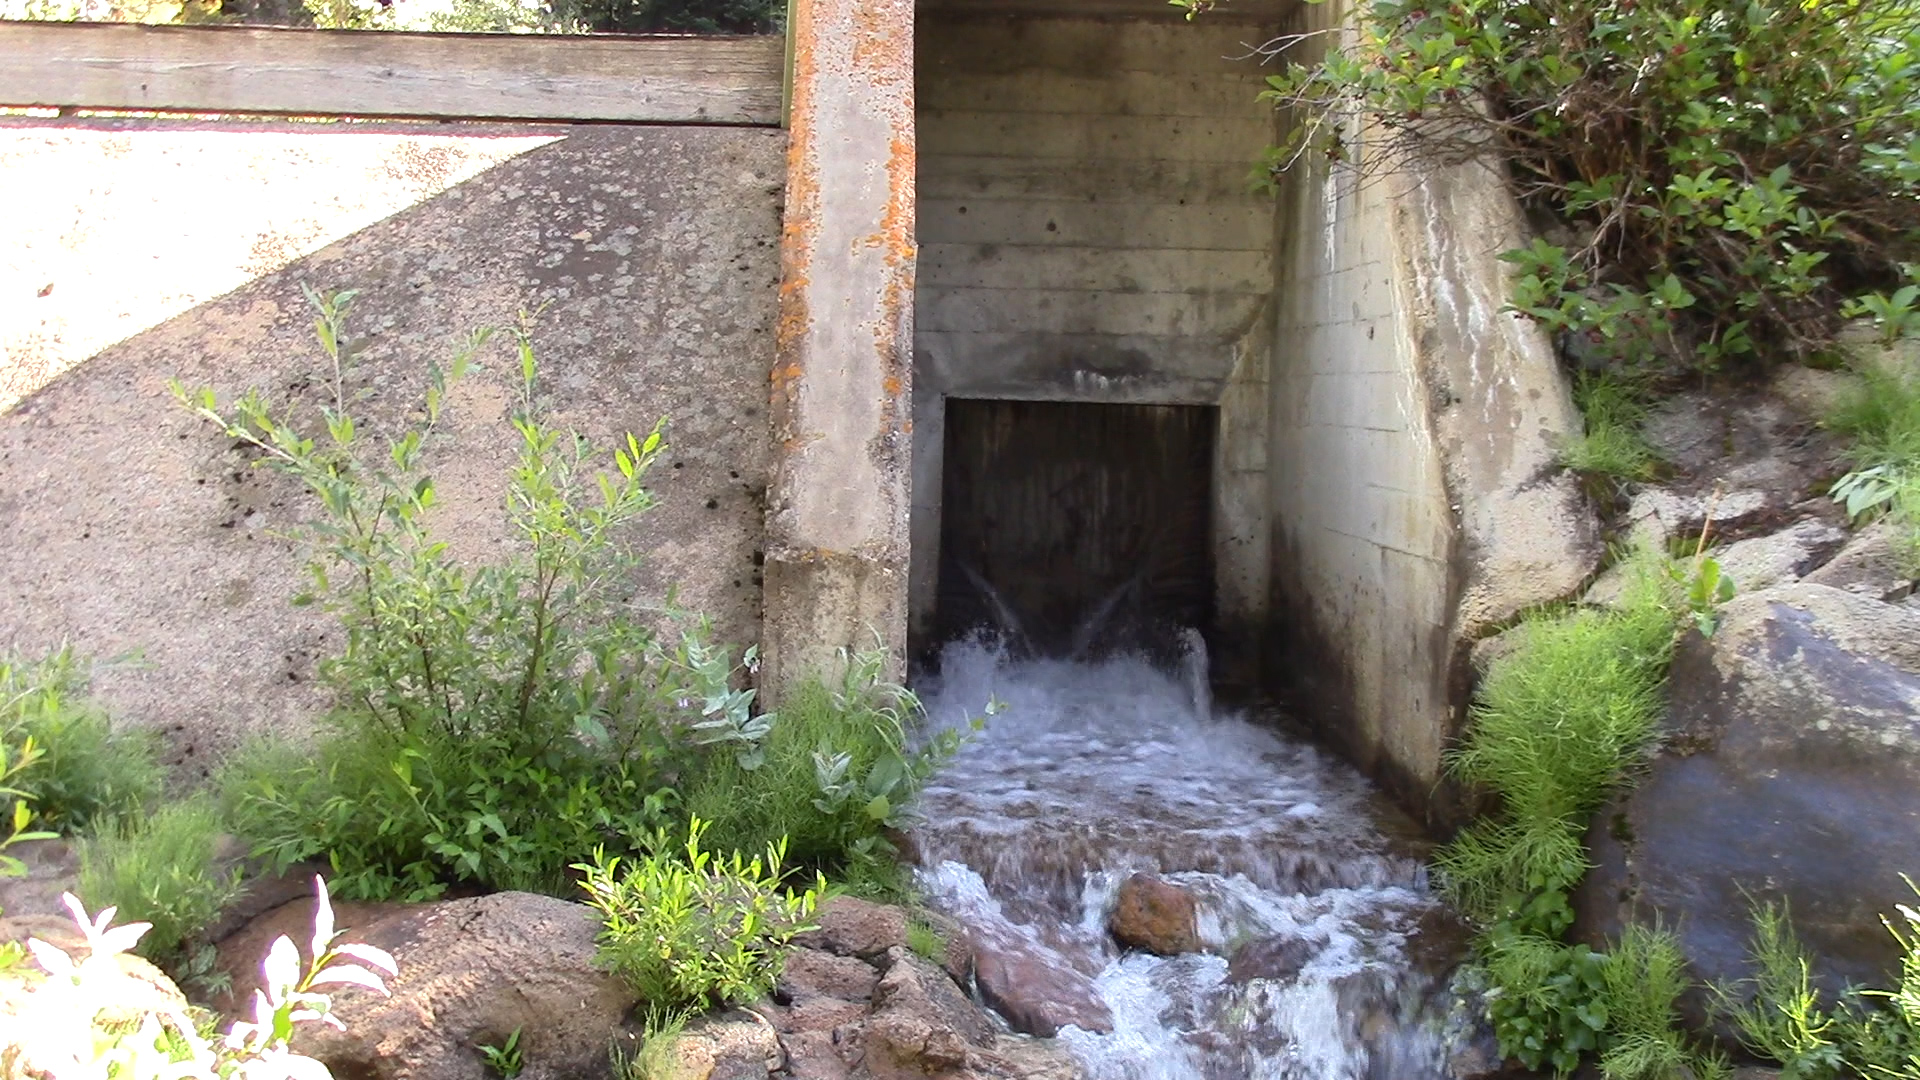 In early August, Denver Water released an additional 40-million gallons of water from its diversions into Ranch Creek over a 10-day span. 